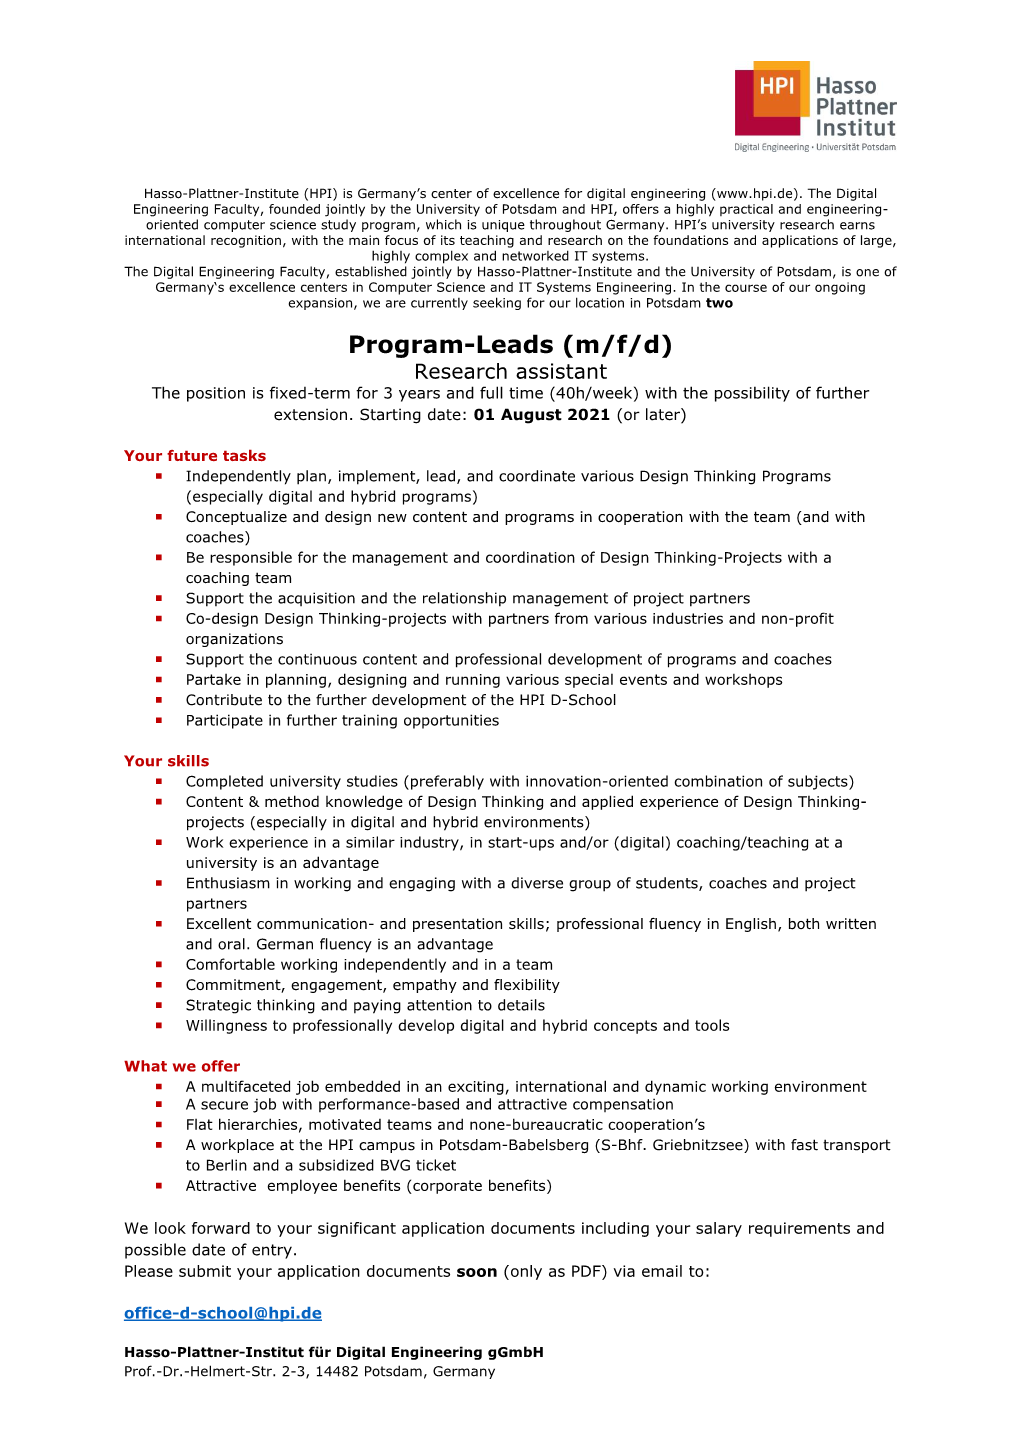 Program-Leads (M/F/D) Research Assistant the Position Is Fixed-Term for 3 Years and Full Time (40H/Week) with the Possibility of Further Extension